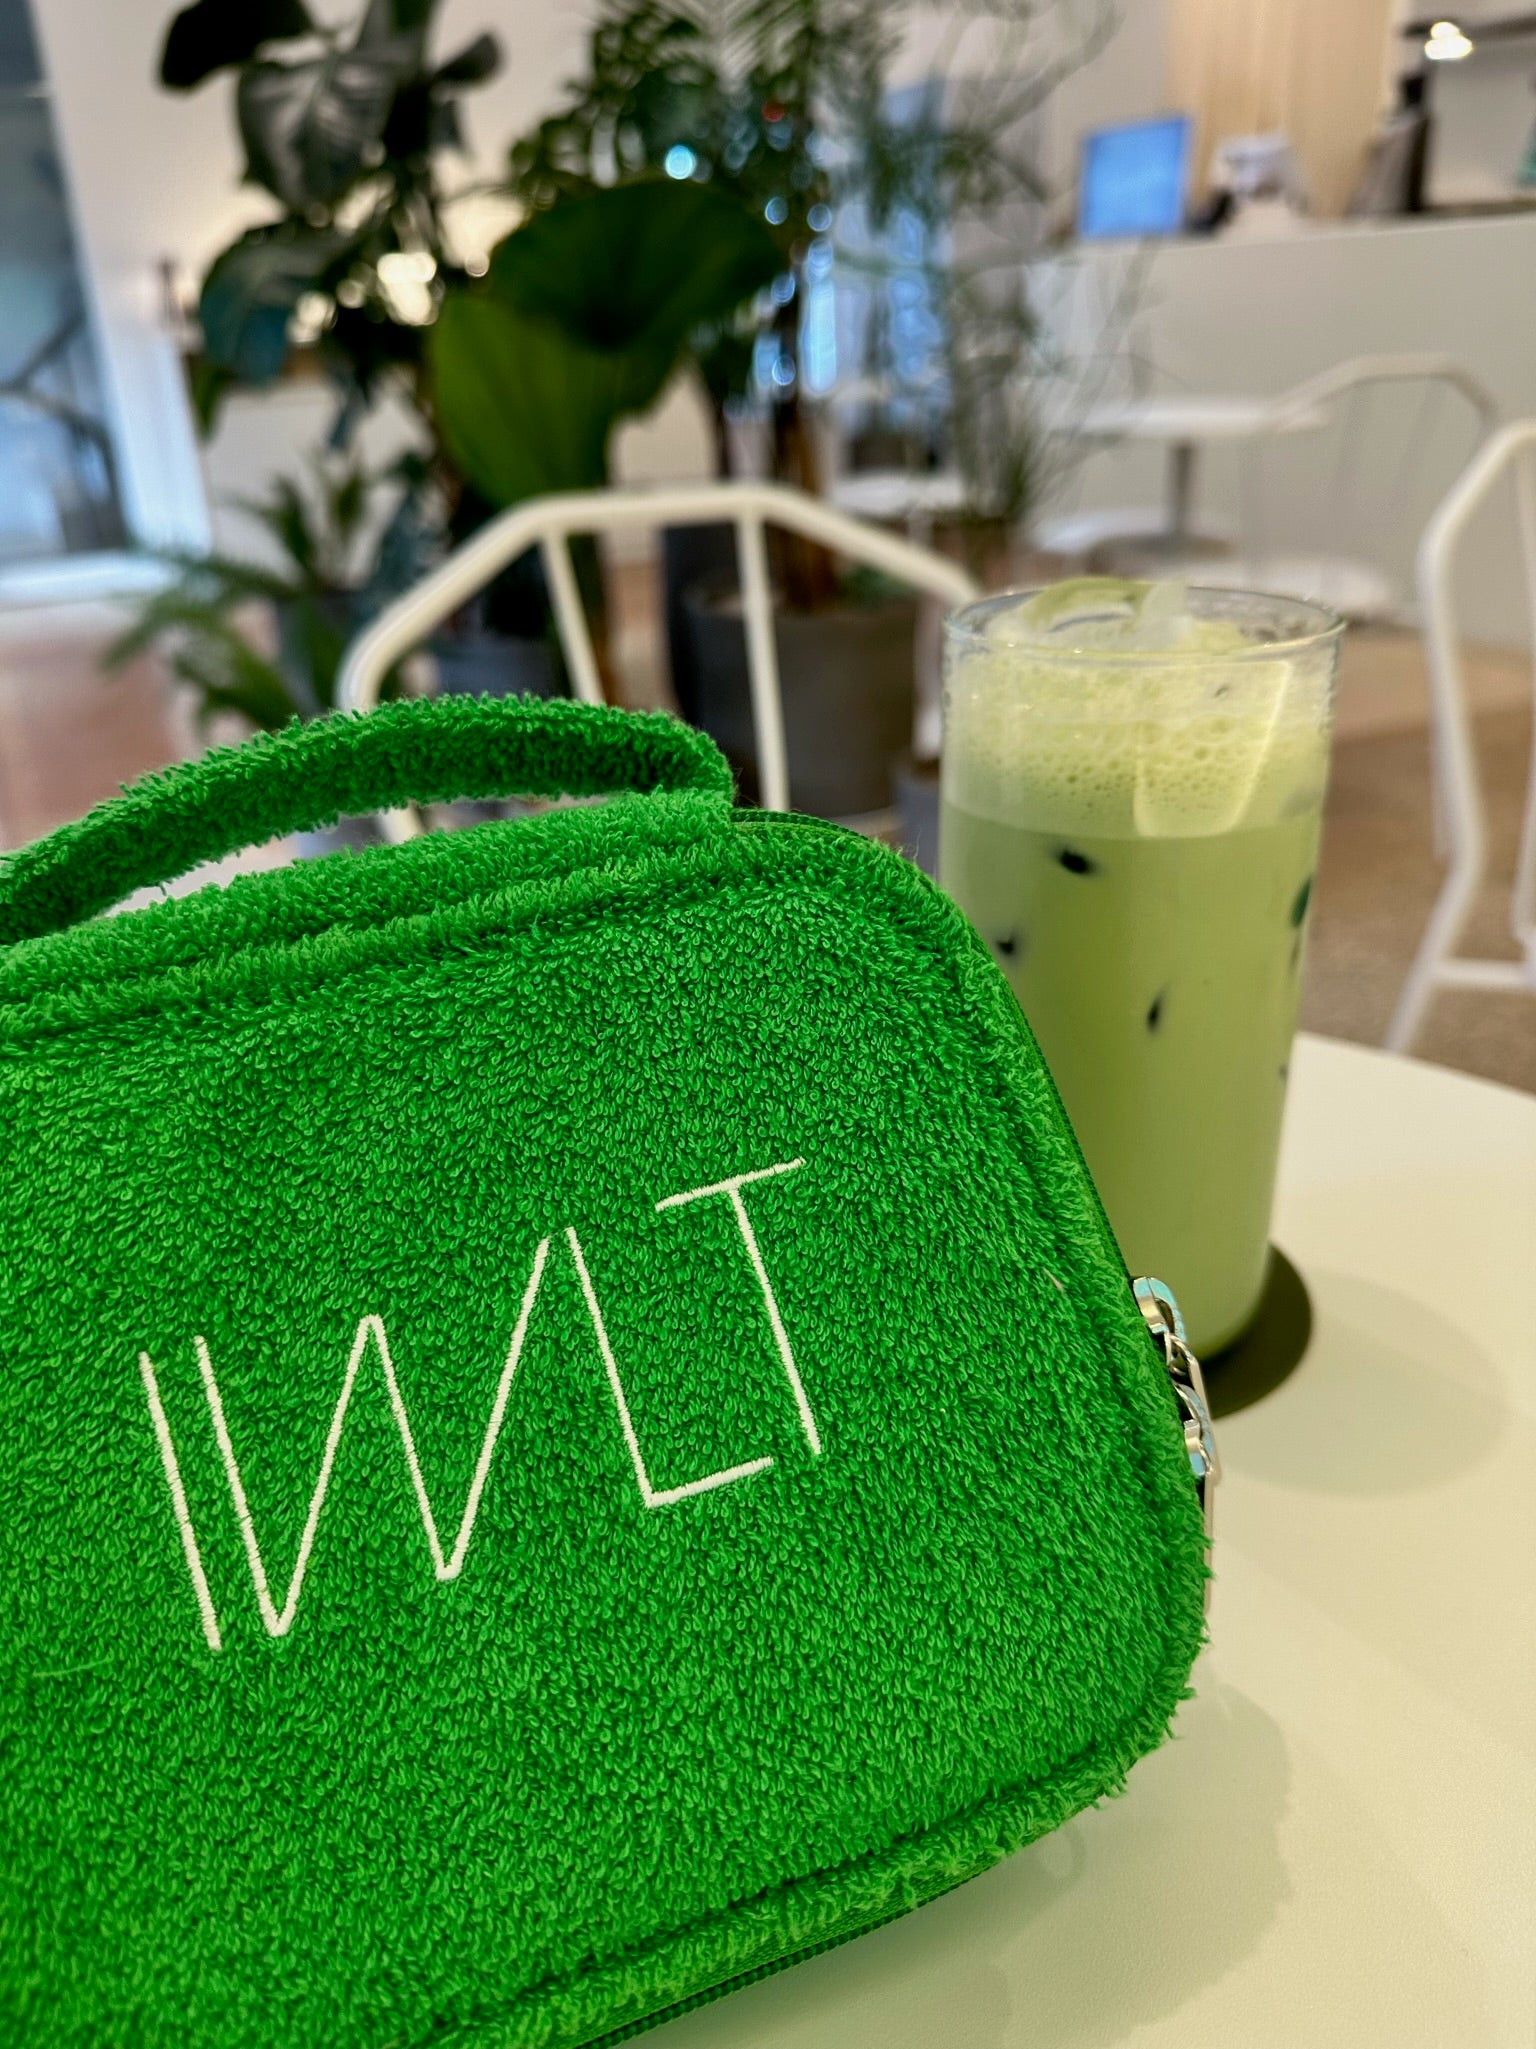 IWLT Terry Pouch